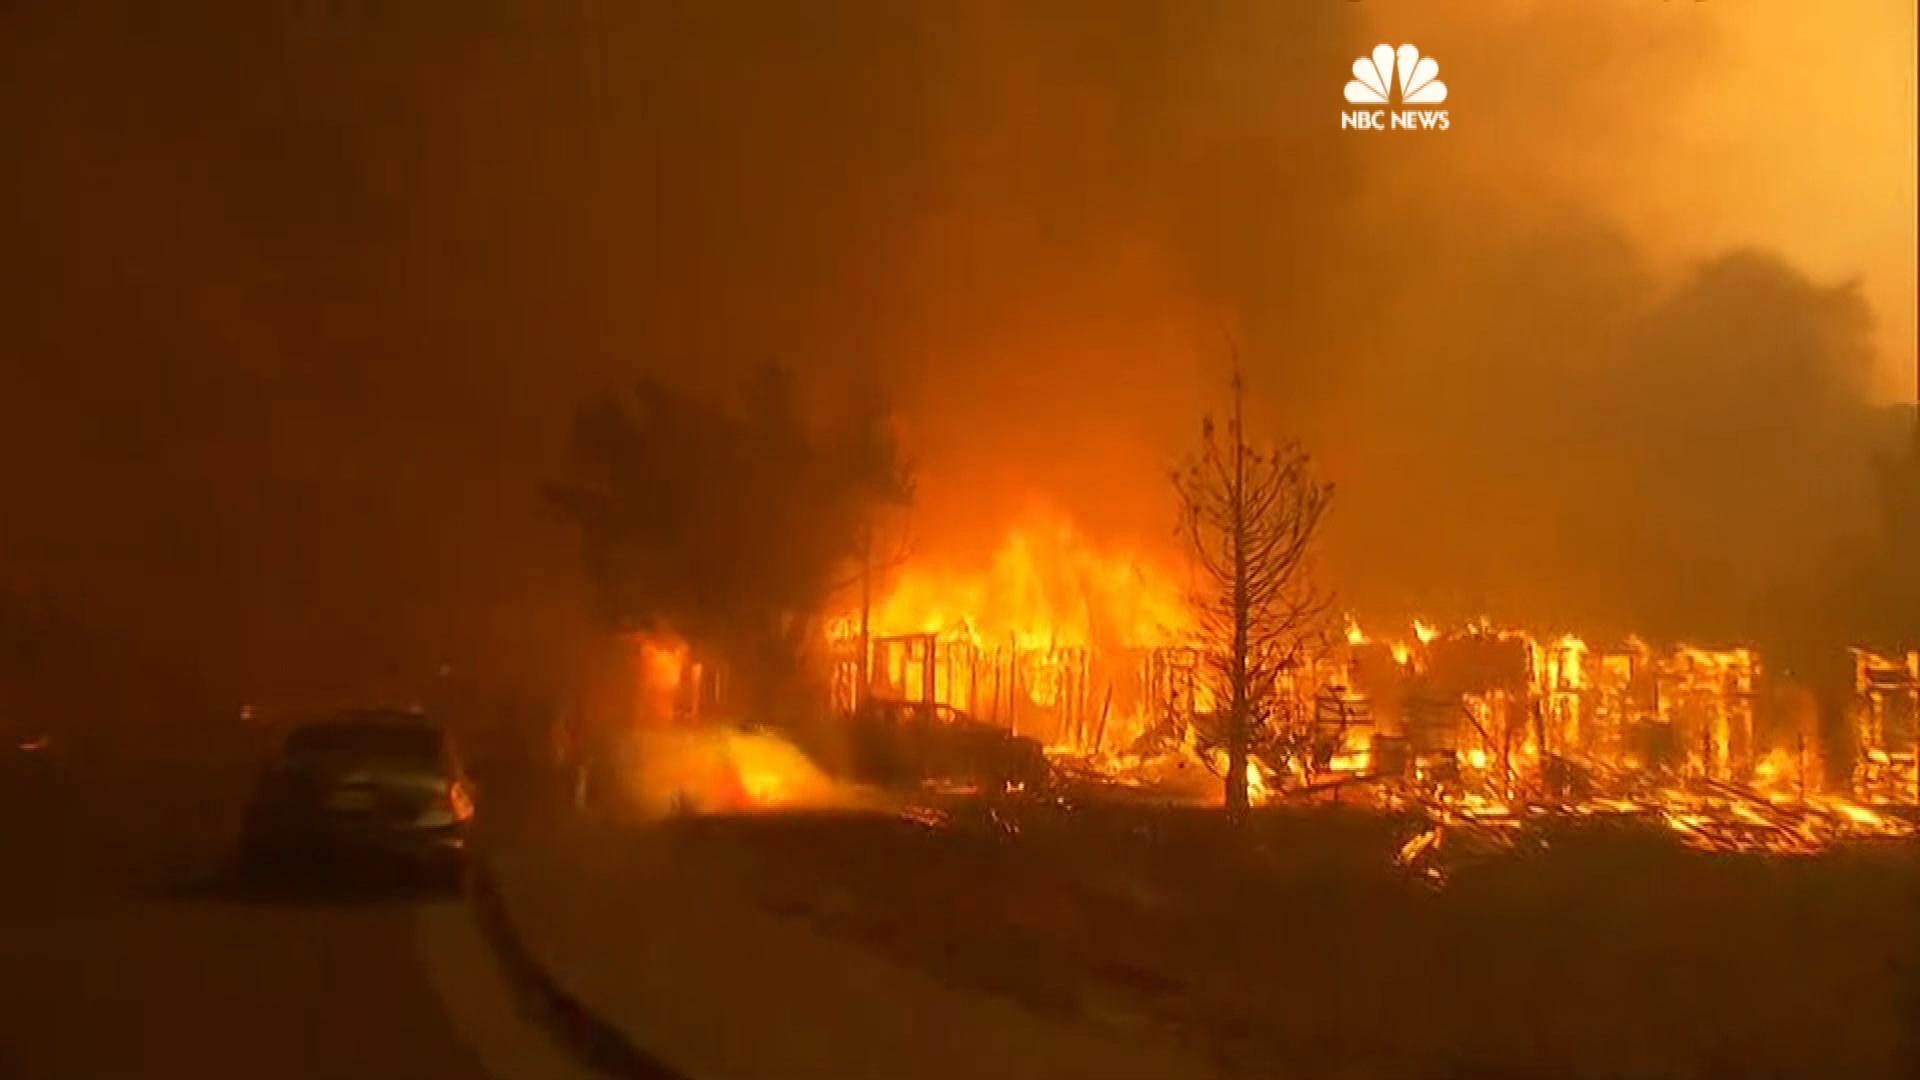 Massive Forest Fires Move Through California Damaging Thousands Of Acres